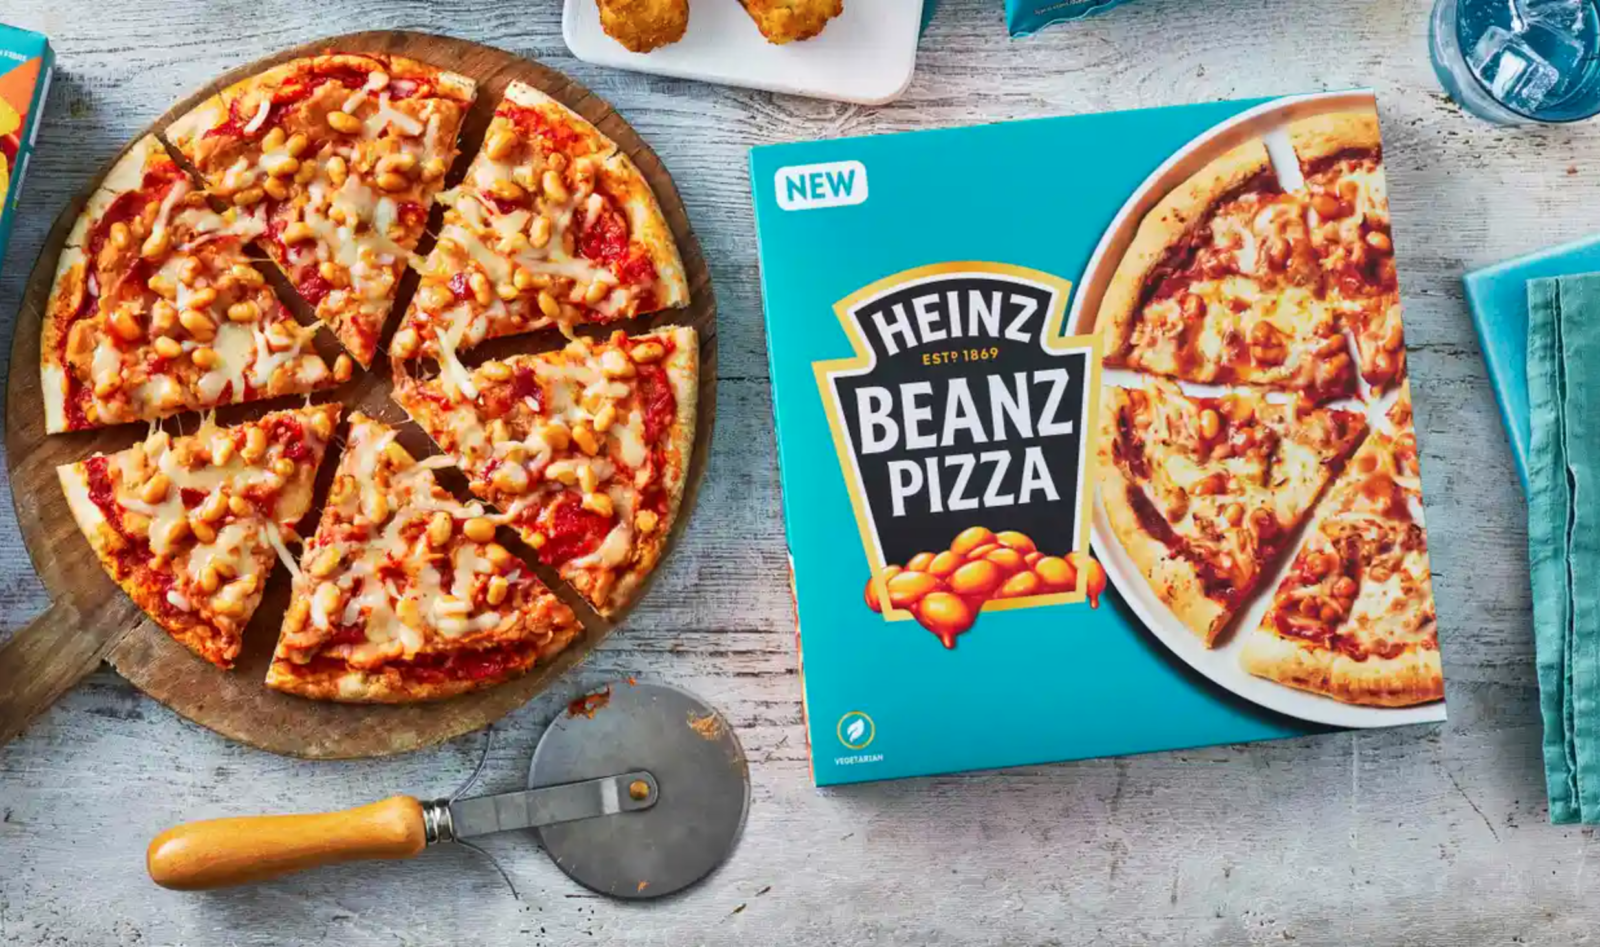 Heinz’s famous baked beans pizza is back almost 20 years after it was discontinued